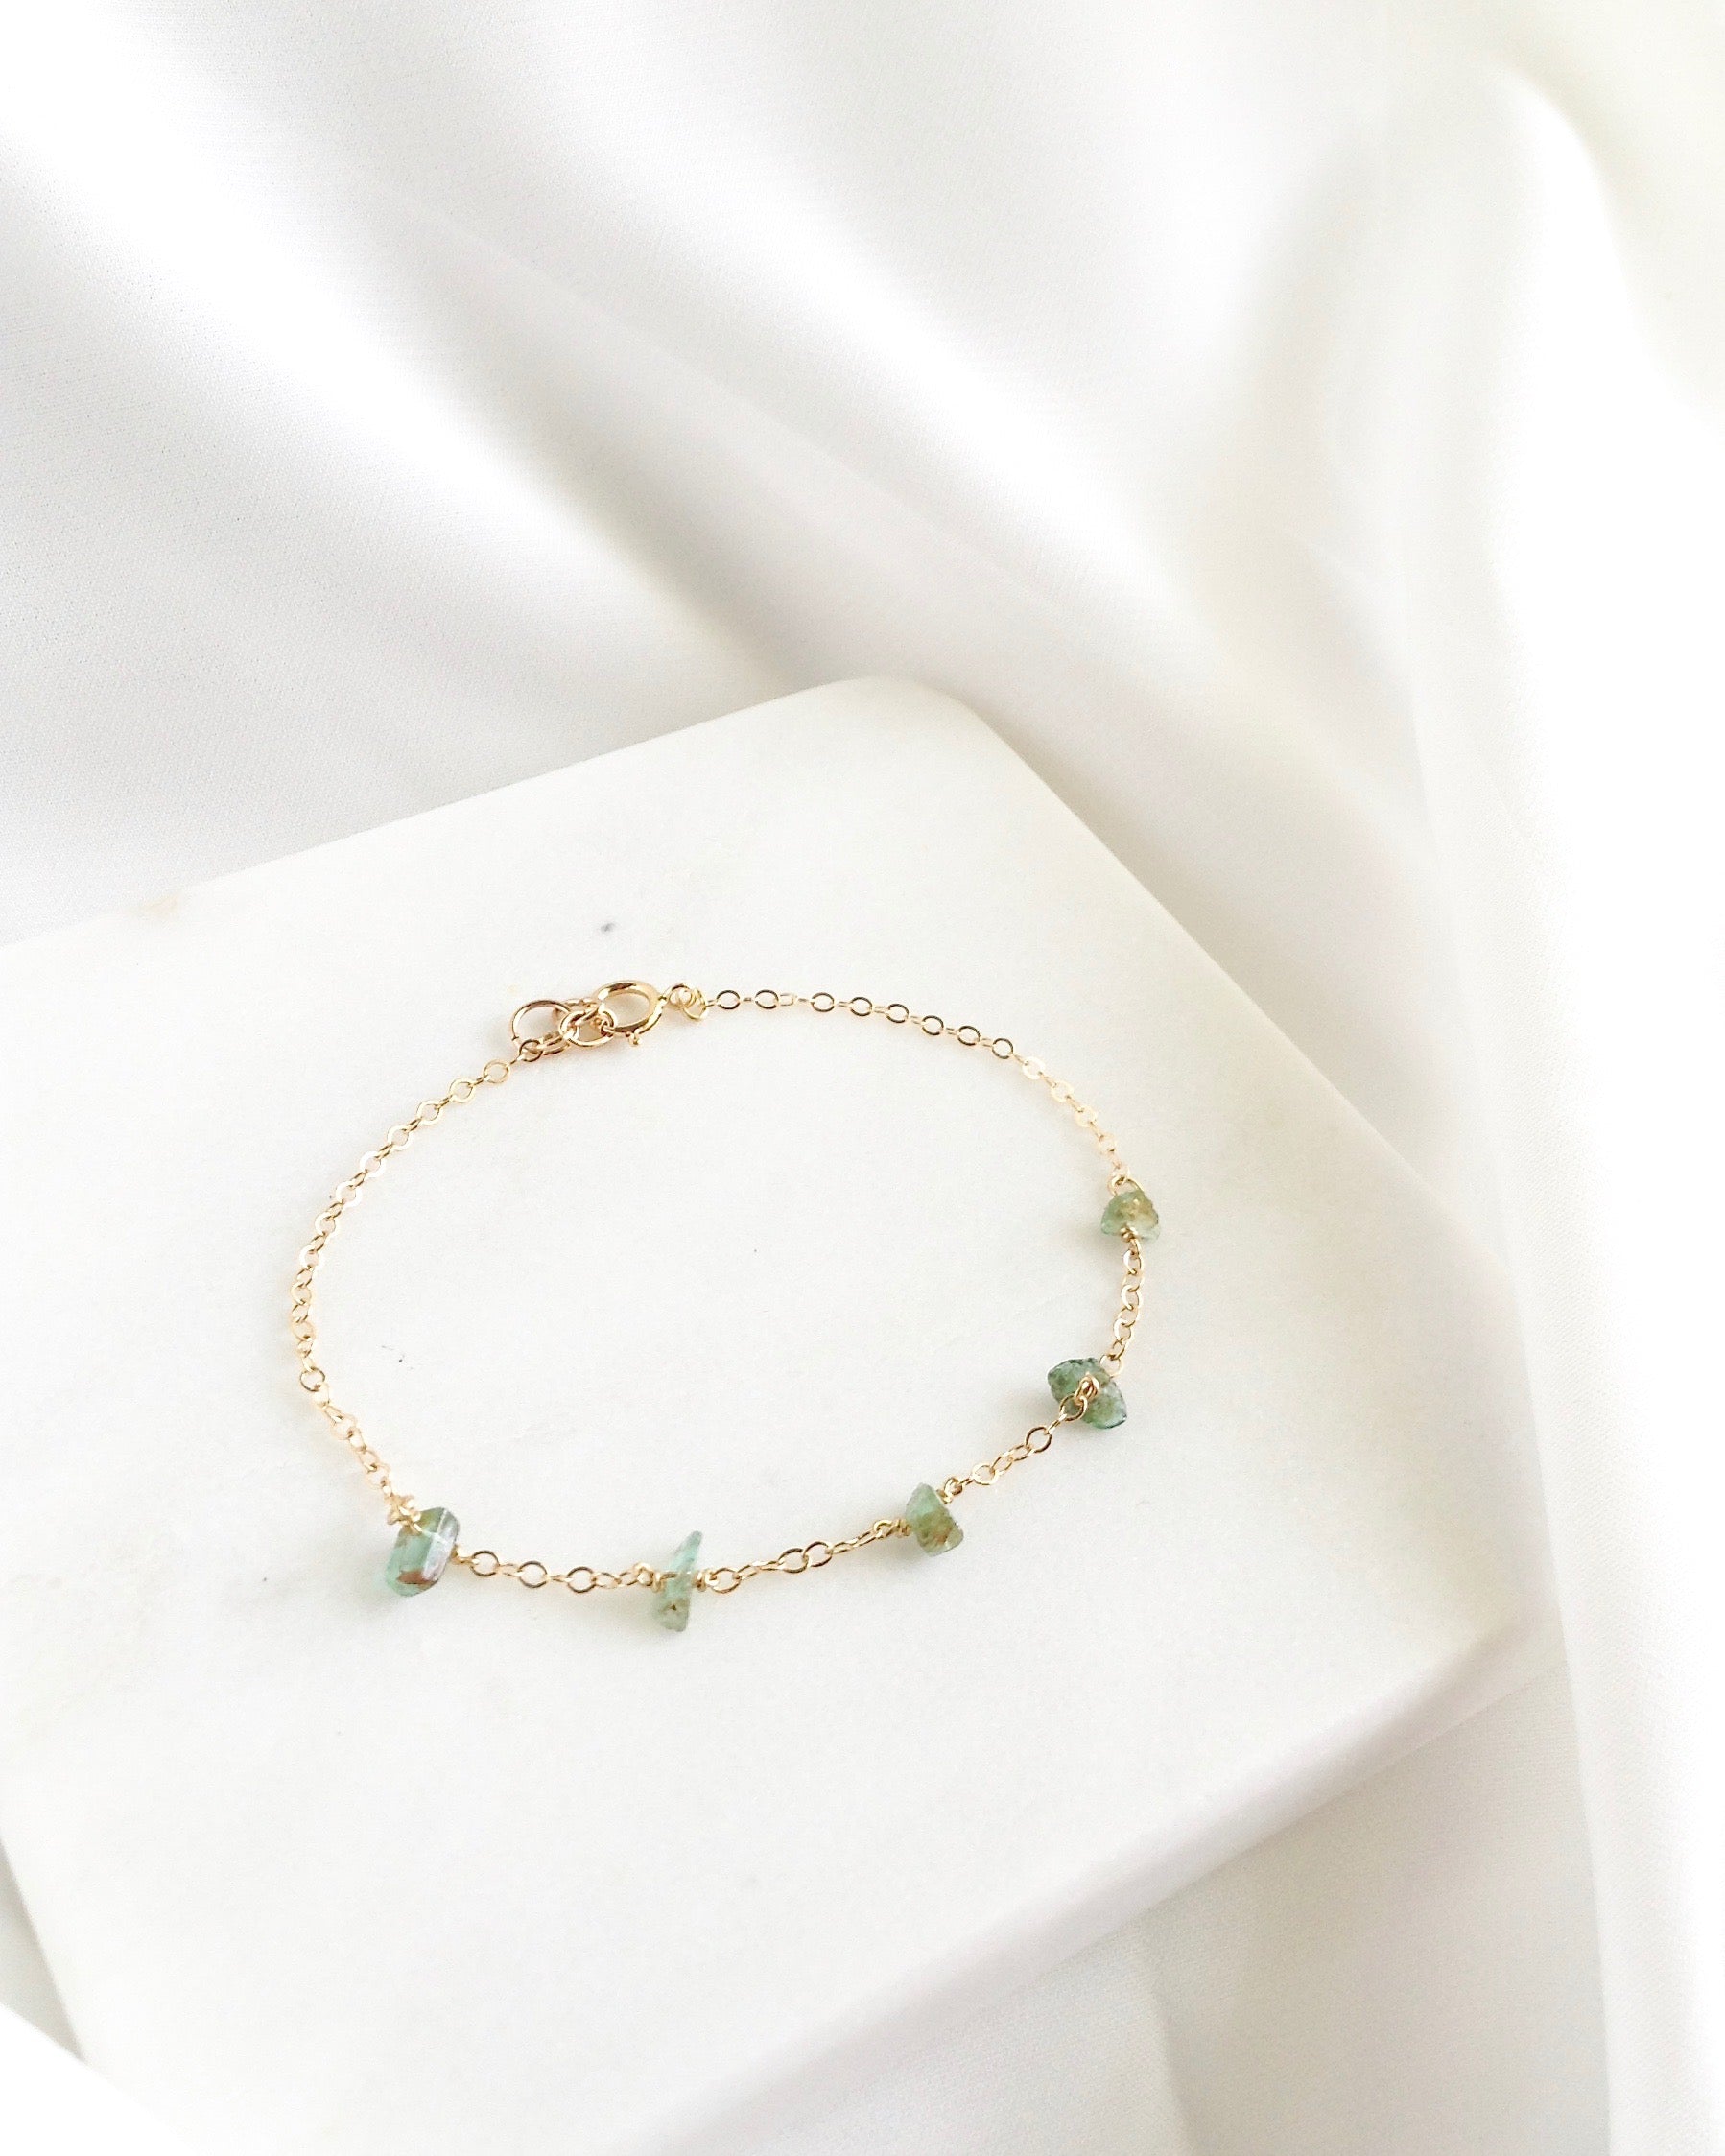 Colombian Emerald Bracelet in Gold Filled or Sterling Silver | IB Jewelry